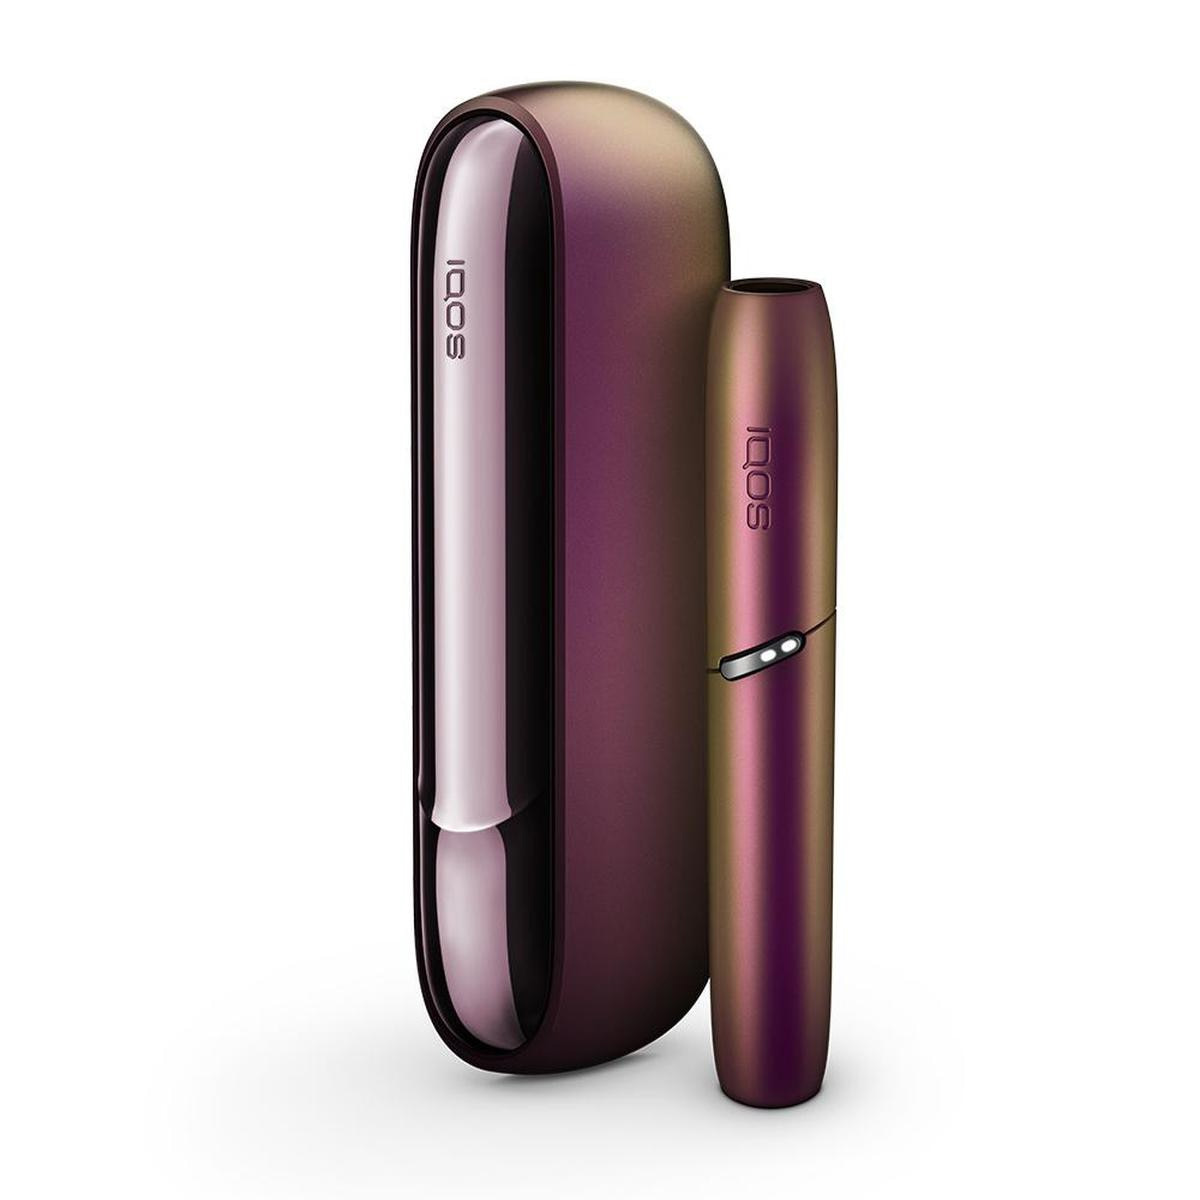 Buy Online IQOS 3 DUO Prism Limited Edition - price 650 AED ...